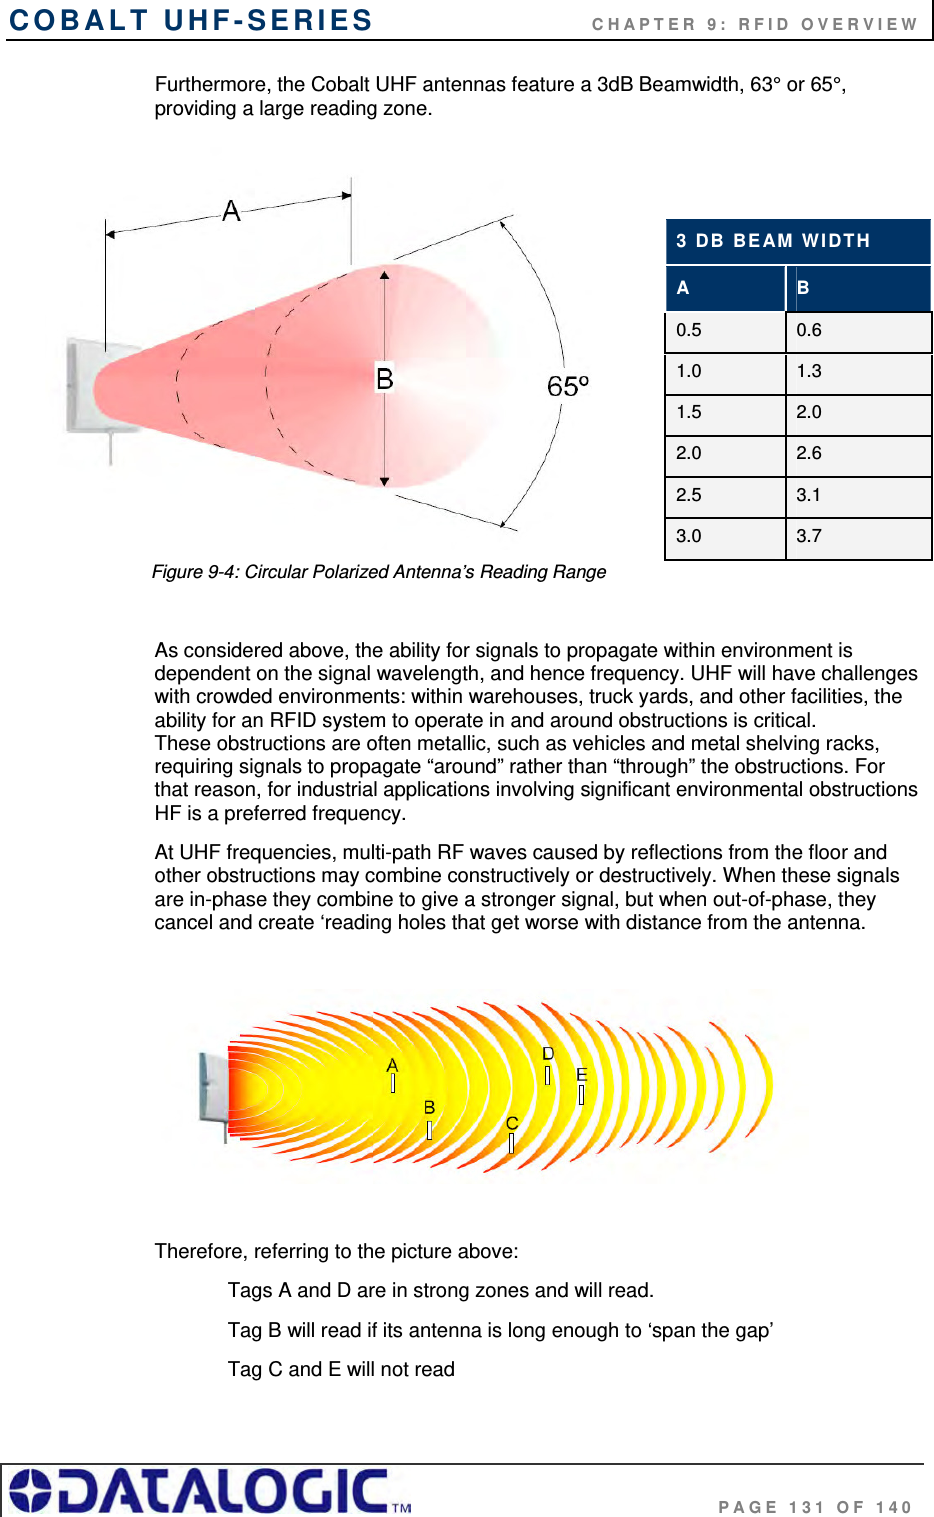 COBALT UHF-SERIES      CHAPTER 9: RFID OVERVIEW                                     PAGE 131 OF 140 Furthermore, the Cobalt UHF antennas feature a 3dB Beamwidth, 63° or 65°, providing a large reading zone.                              Figure 9-4: Circular Polarized Antenna’s Reading Range  As considered above, the ability for signals to propagate within environment is dependent on the signal wavelength, and hence frequency. UHF will have challenges with crowded environments: within warehouses, truck yards, and other facilities, the ability for an RFID system to operate in and around obstructions is critical. These obstructions are often metallic, such as vehicles and metal shelving racks, requiring signals to propagate “around” rather than “through” the obstructions. For that reason, for industrial applications involving significant environmental obstructions HF is a preferred frequency. At UHF frequencies, multi-path RF waves caused by reflections from the floor and other obstructions may combine constructively or destructively. When these signals are in-phase they combine to give a stronger signal, but when out-of-phase, they cancel and create ‘reading holes that get worse with distance from the antenna.    Therefore, referring to the picture above: Tags A and D are in strong zones and will read. Tag B will read if its antenna is long enough to ‘span the gap’ Tag C and E will not read 3 DB BEAM WIDTH A  B 0.5  0.6 1.0  1.3 1.5  2.0 2.0  2.6 2.5  3.1 3.0  3.7 